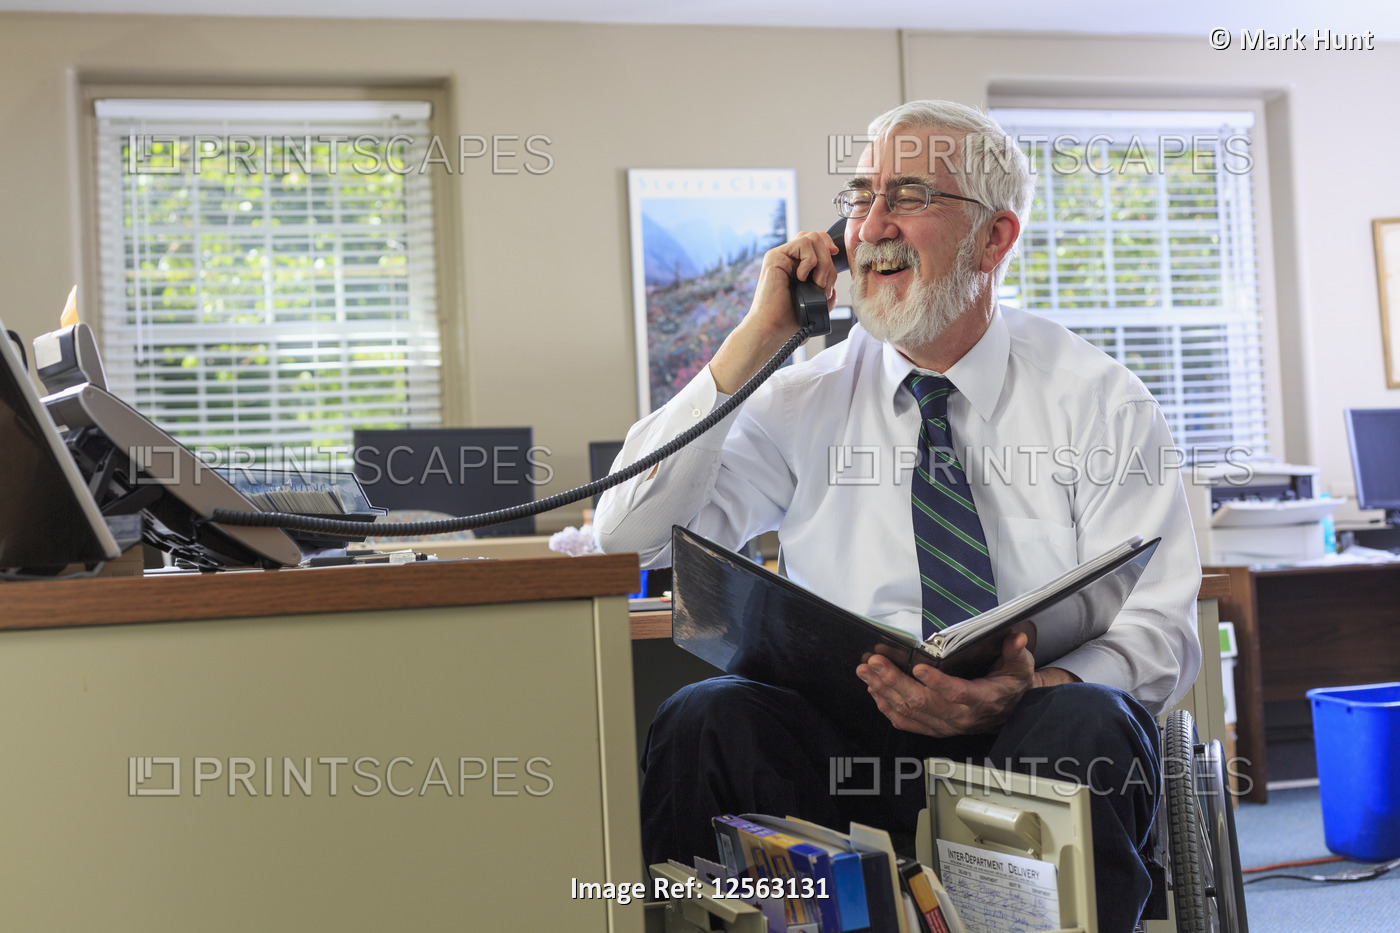 Man with Muscular Dystrophy in a wheelchair on the phone in his office